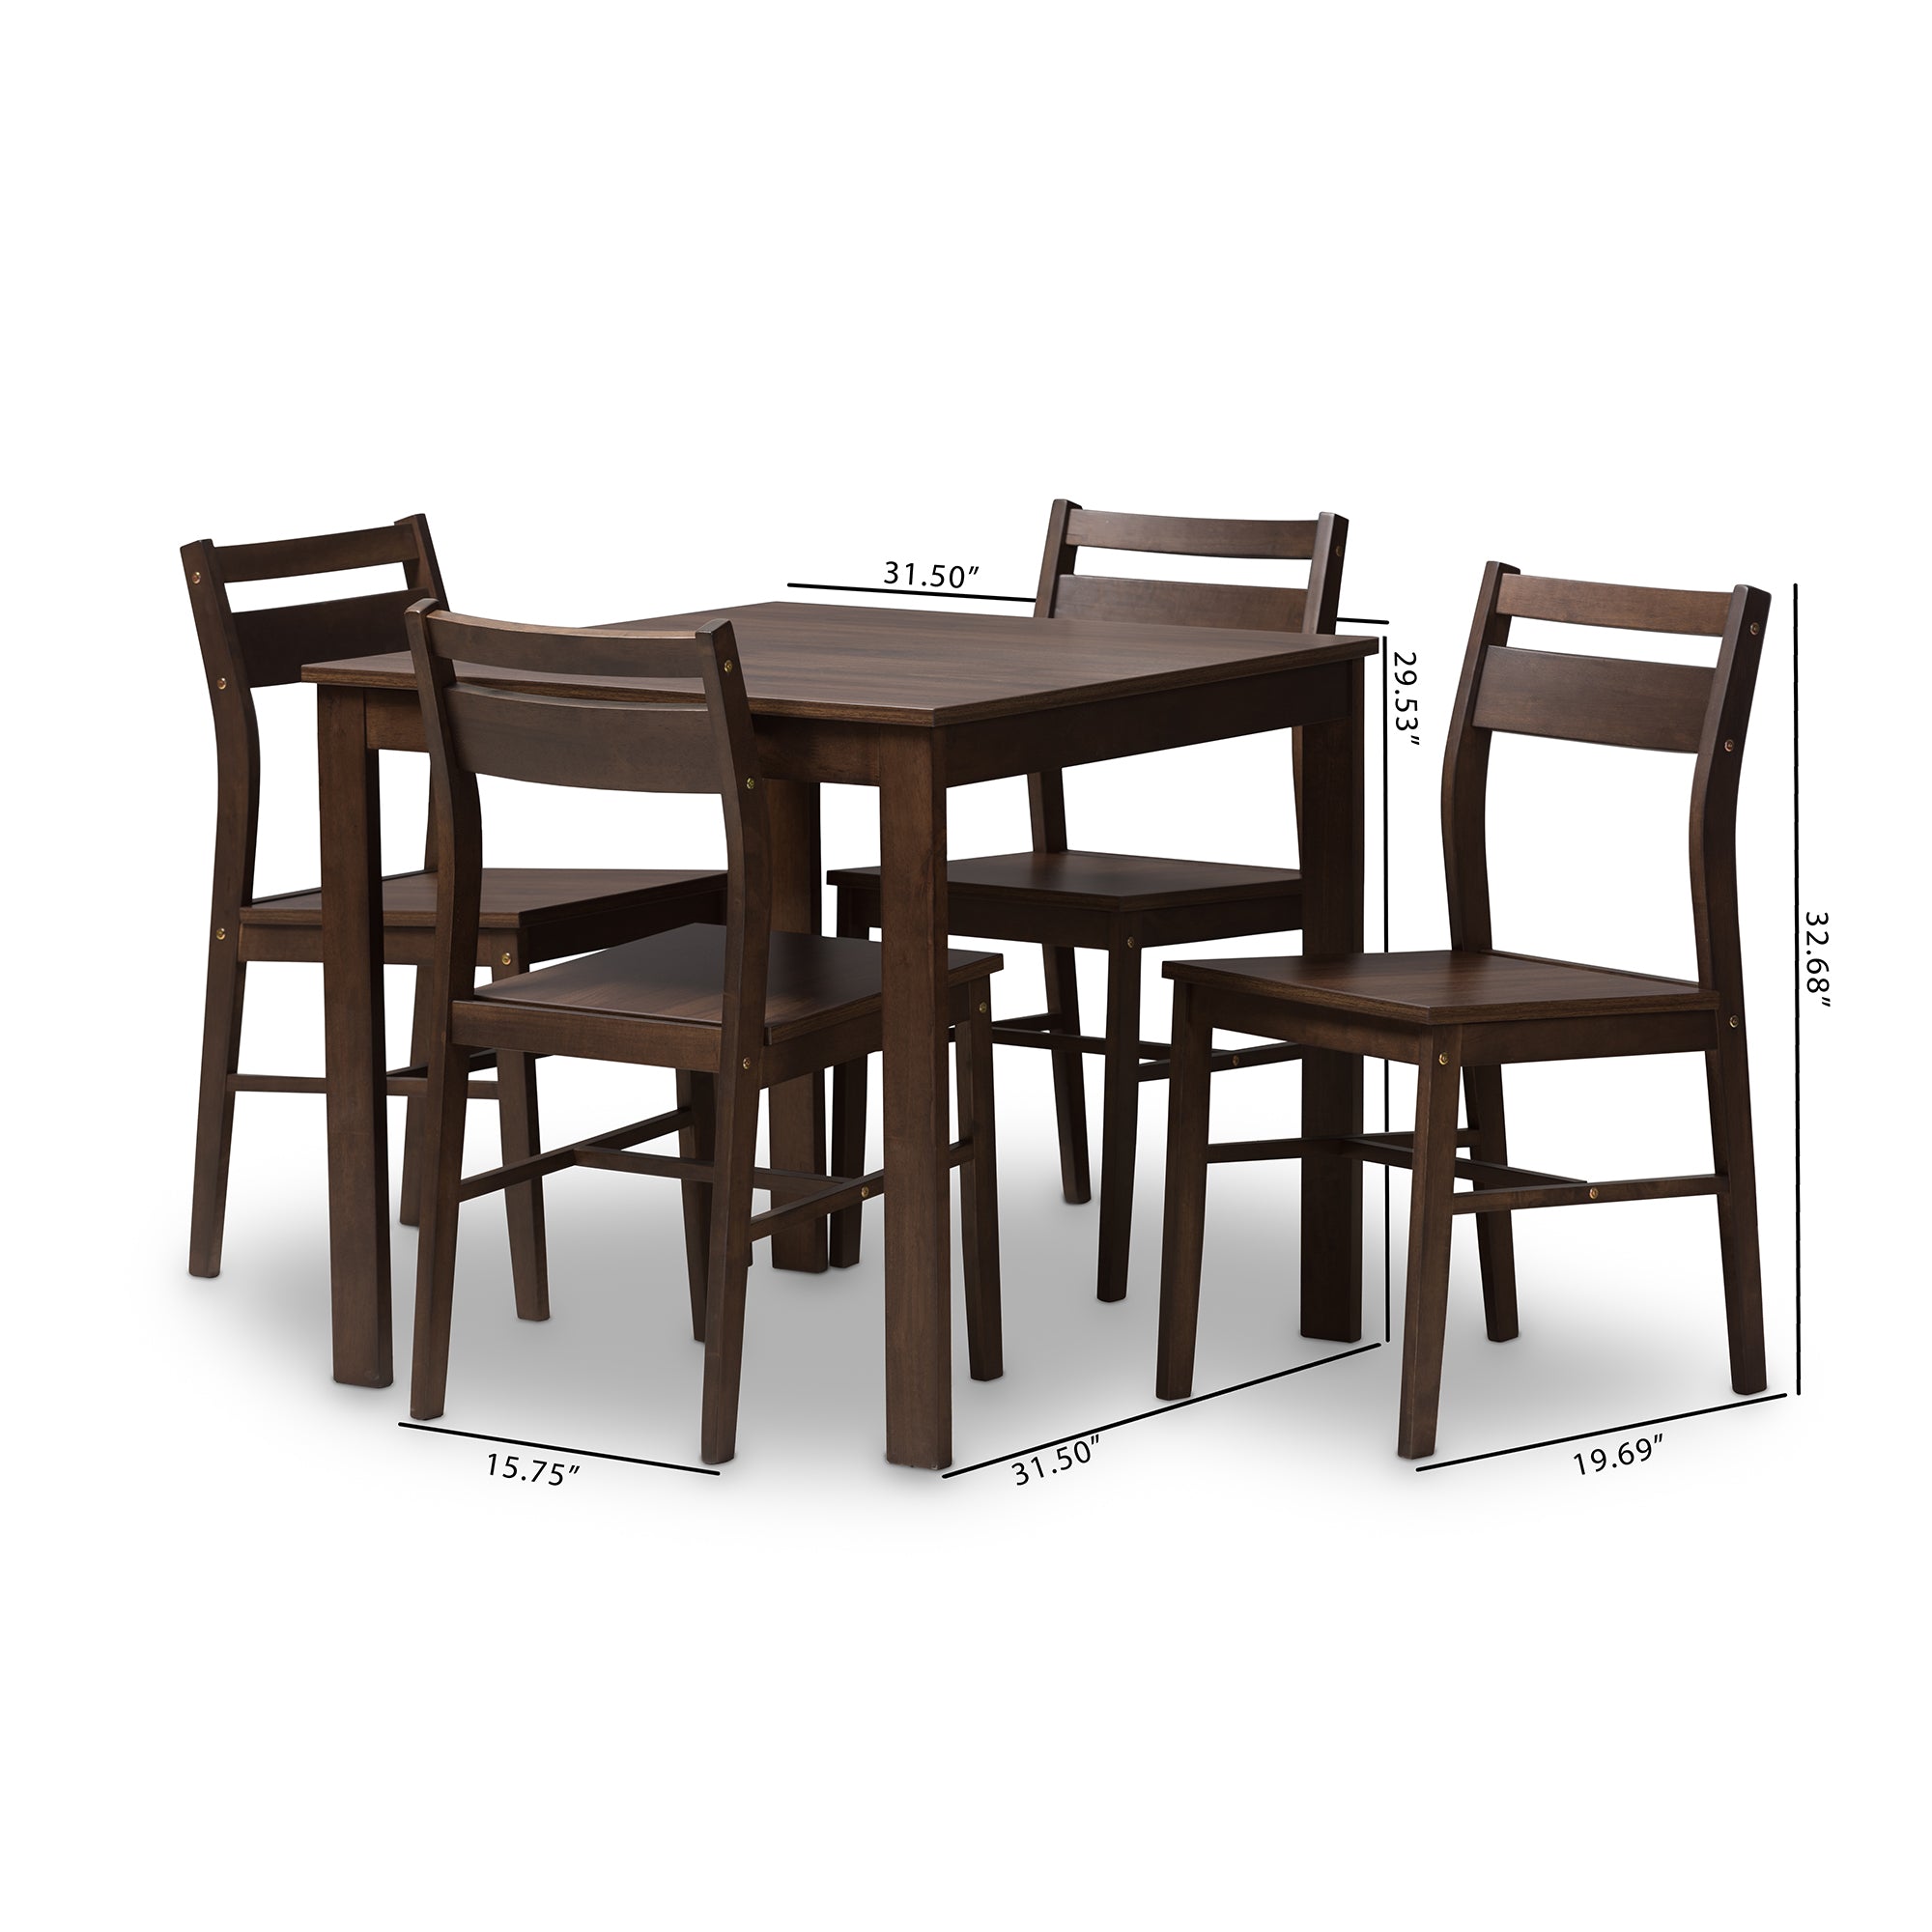 Lovy Contemporary Dining Table & Dining Chairs Walnut-Finished-Dining Set-Baxton Studio - WI-Wall2Wall Furnishings